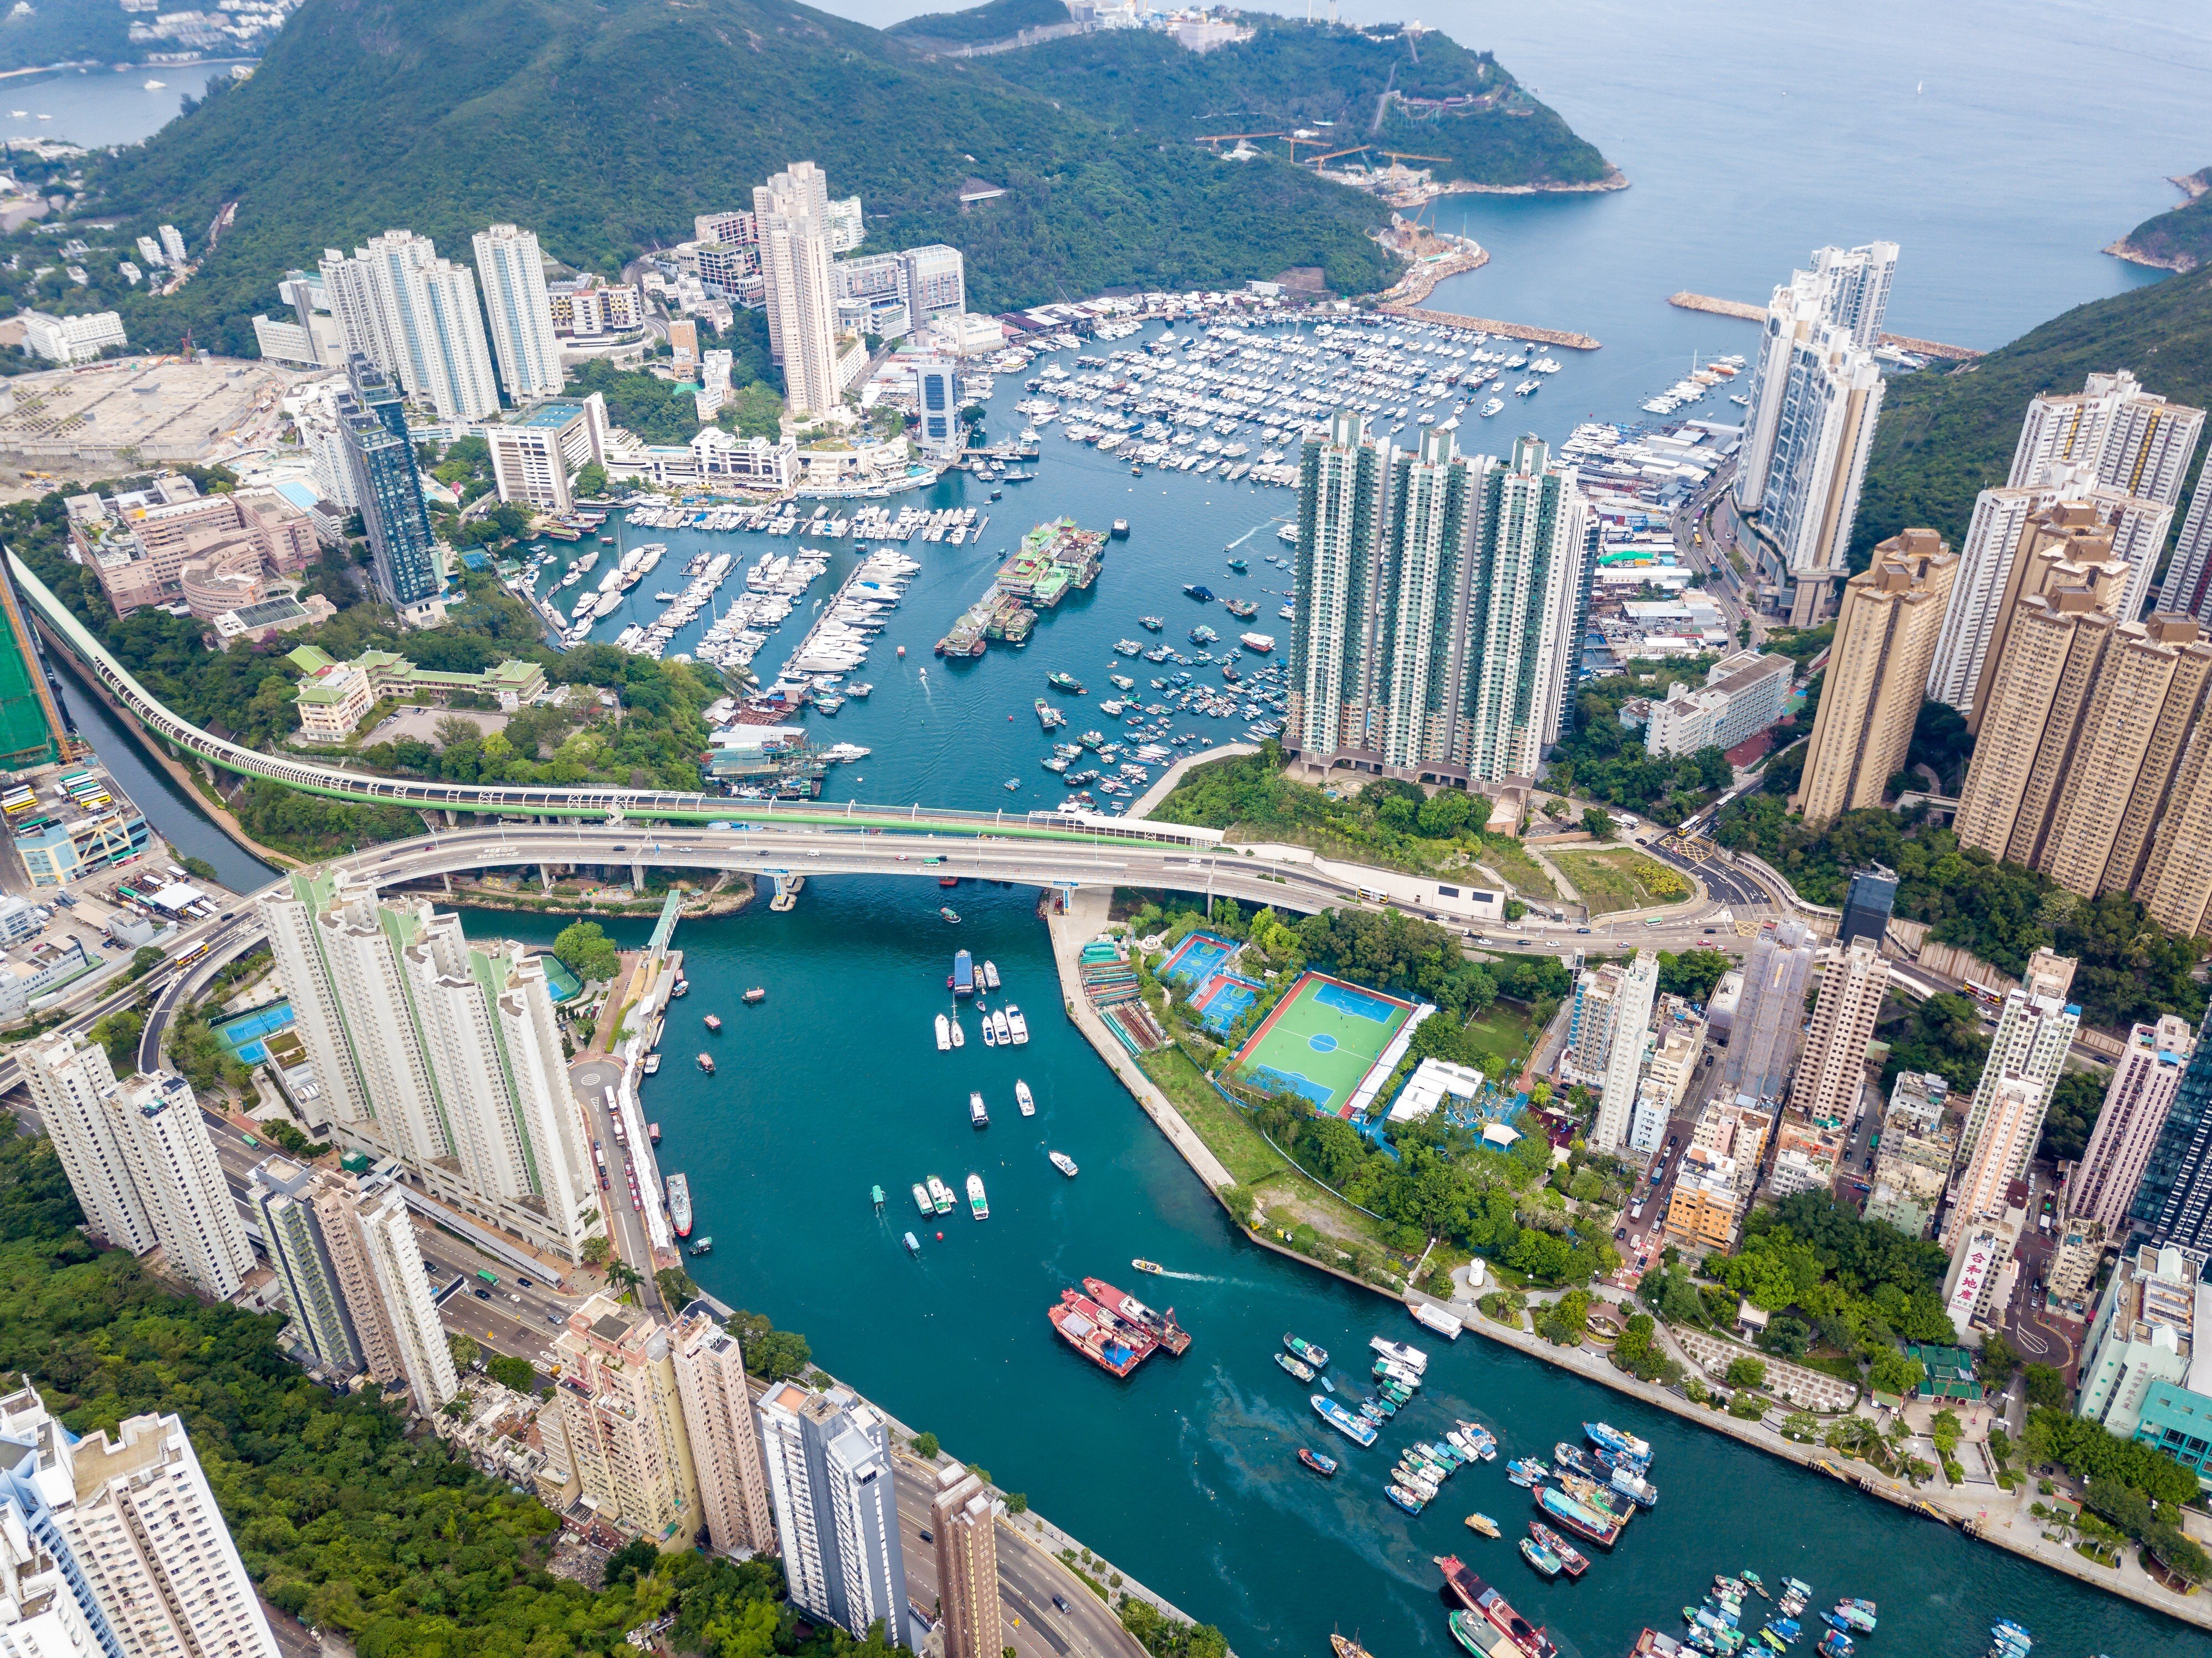 Hong Kong’s Island South, which includes neighbourhoods such as Wong Chuk Hang, Aberdeen and Ap Lei Chau, is at the heart of a government development plan to revamp the area into a major residential and commercial hub. Photo: Shutterstock